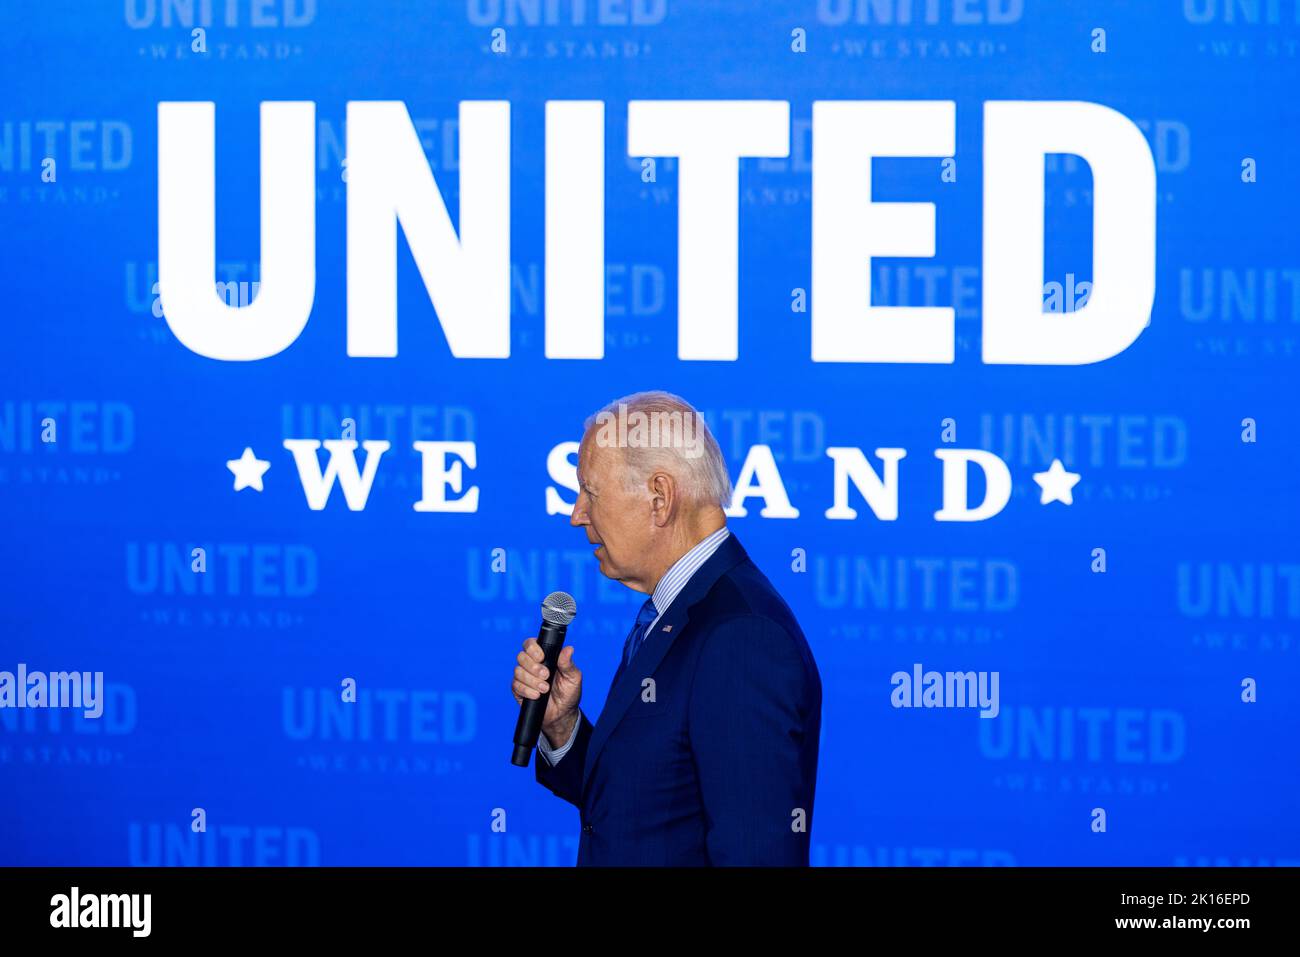 Washington DC, USA. 15th Sep, 2022. United States President Joe Biden makes remarks at the United We Stand Summit in the East Room of the White House in Washington DC, USA, 15 September 2022. Credit: Jim LoScalzo/Pool via CNP/dpa/Alamy Live News Stock Photo